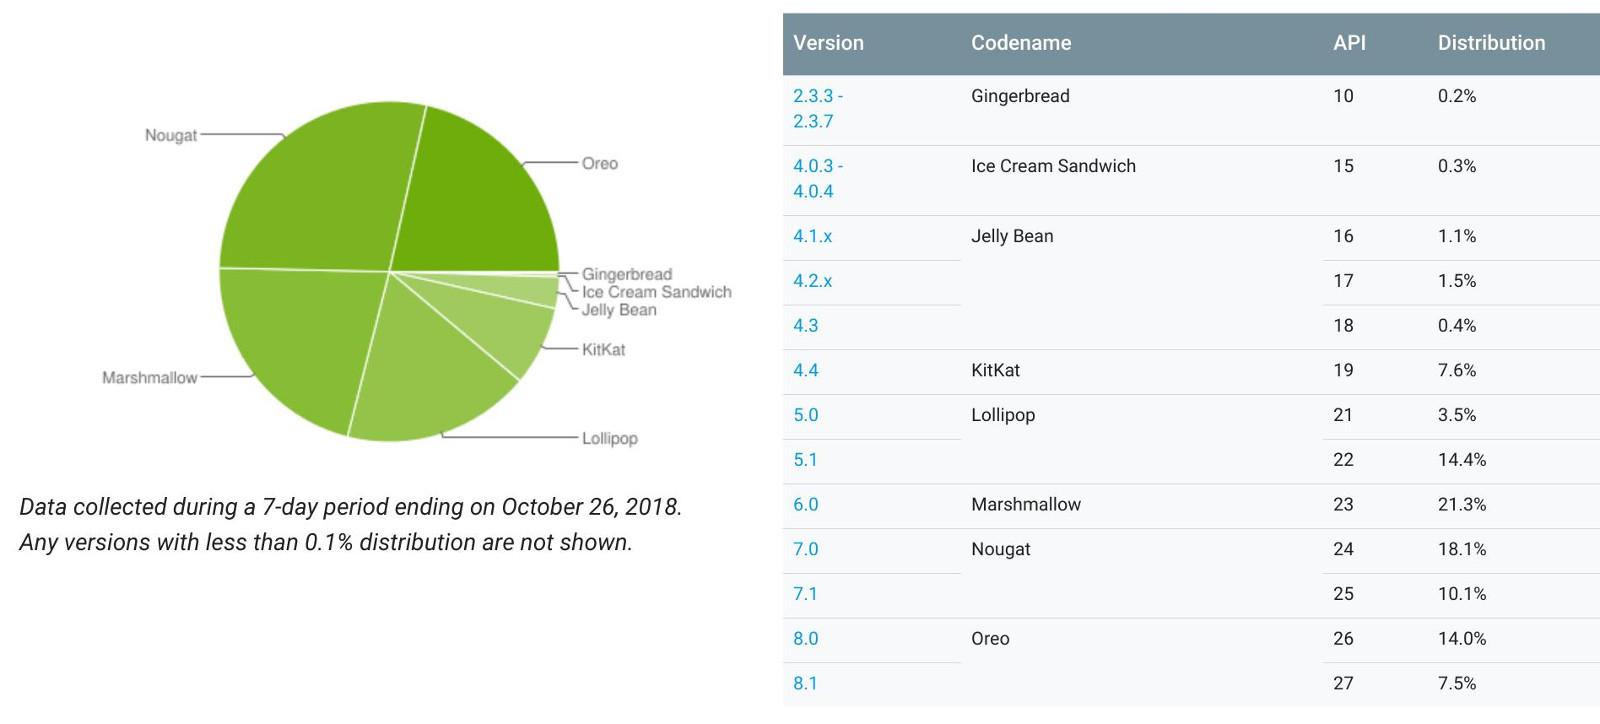 Android Version Pie Chart